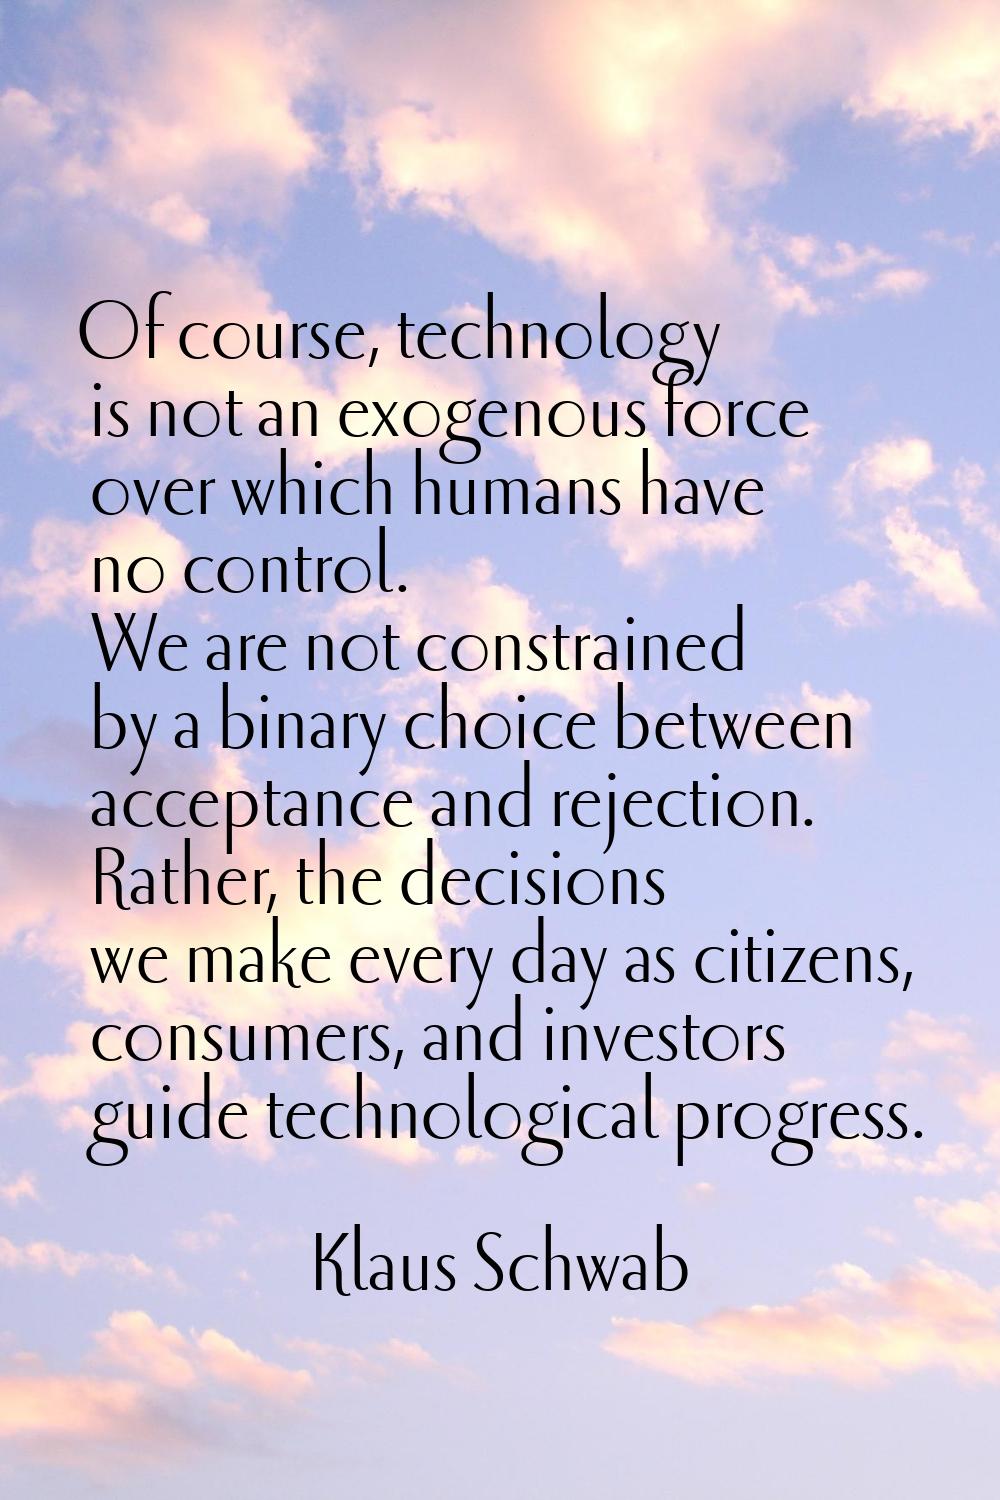 Of course, technology is not an exogenous force over which humans have no control. We are not const